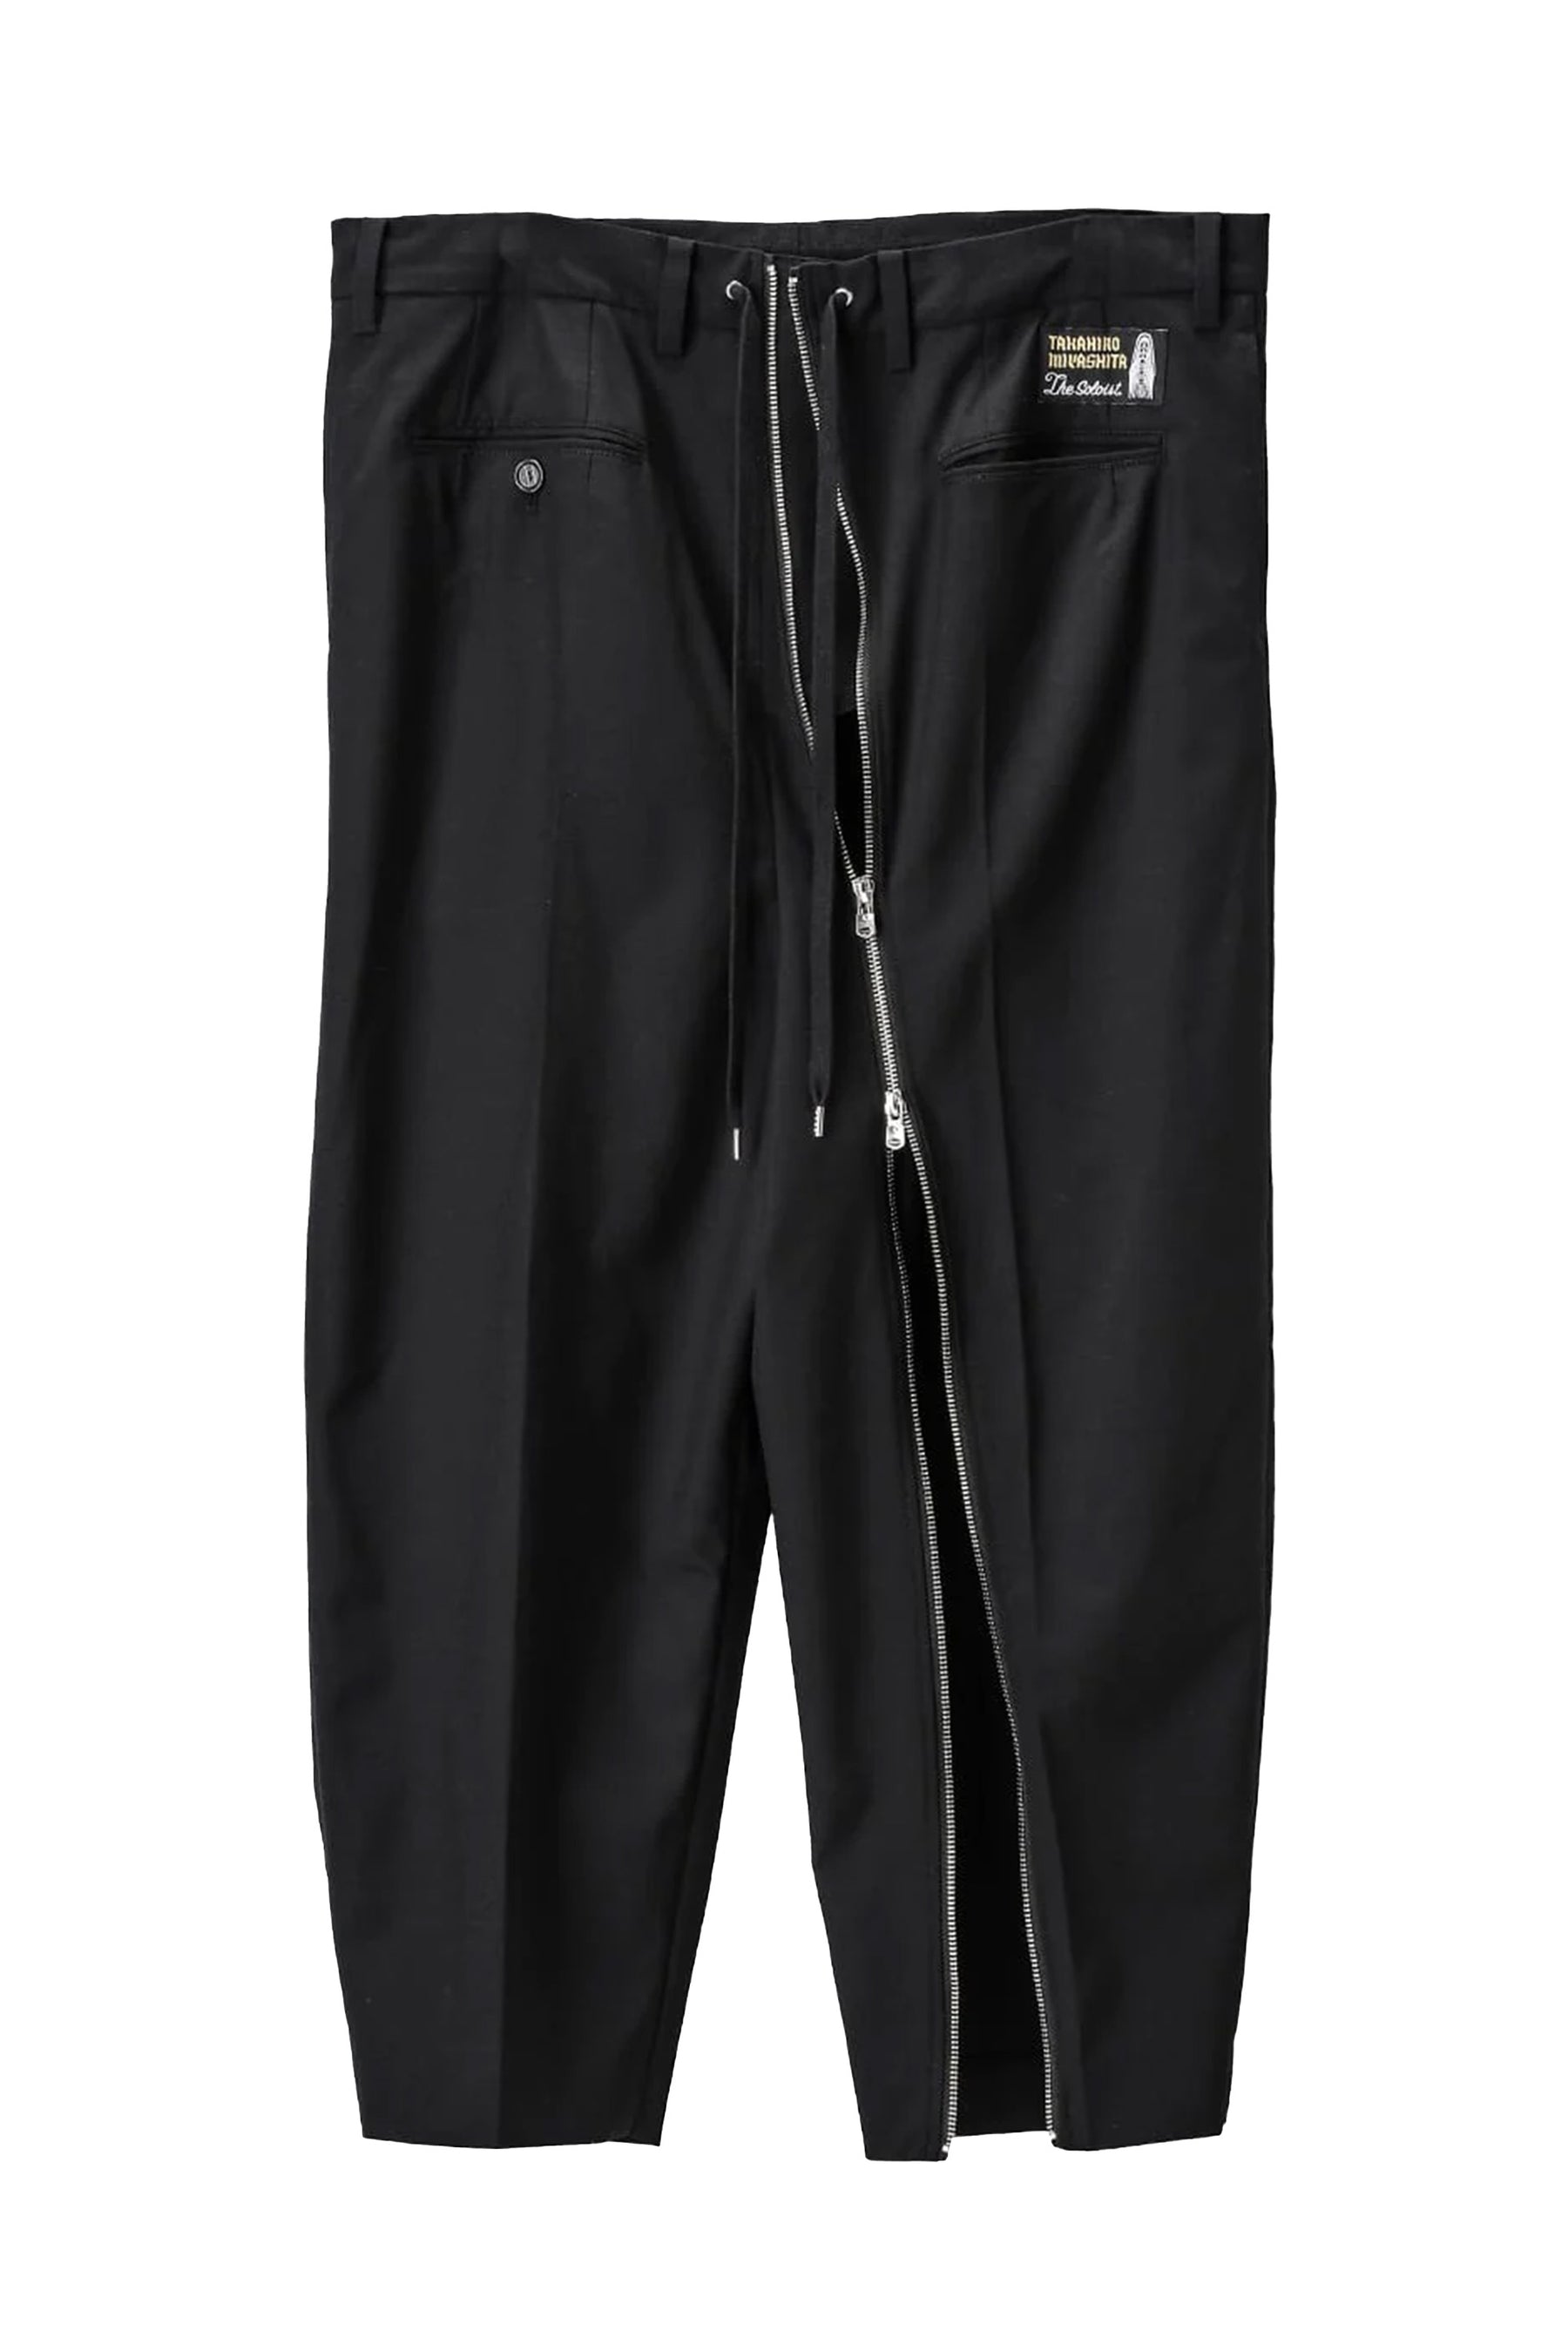 TheSoloist. double knee drawstring pant.